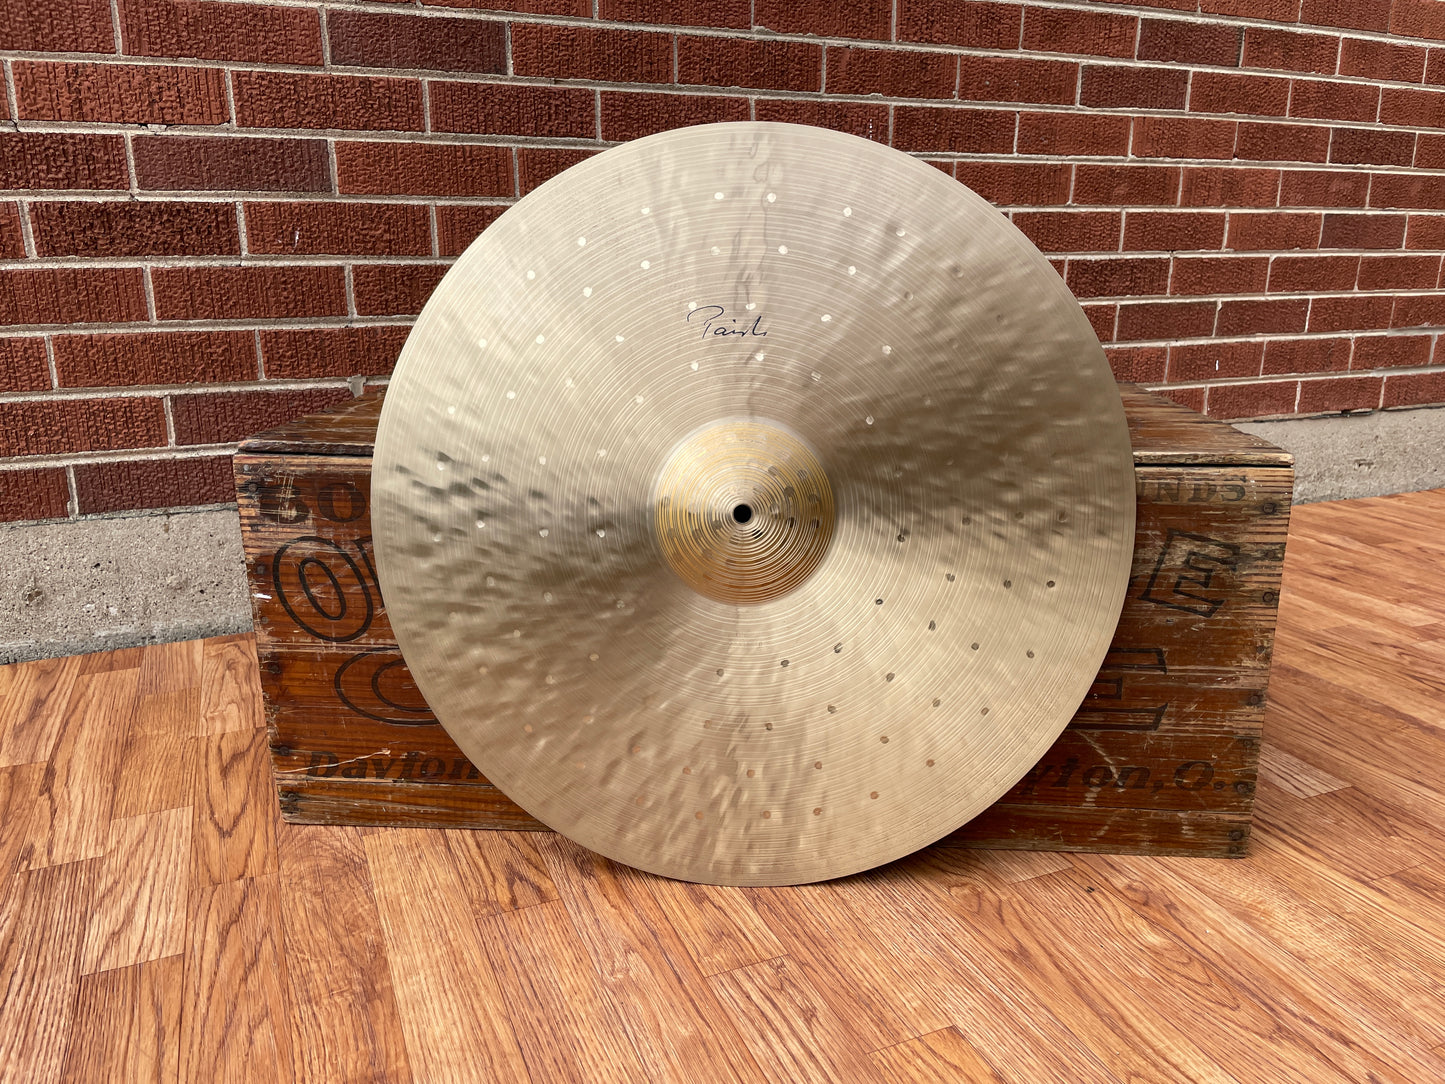 22" Paiste Signature Traditional Extra Light Ride Cymbal 2238g